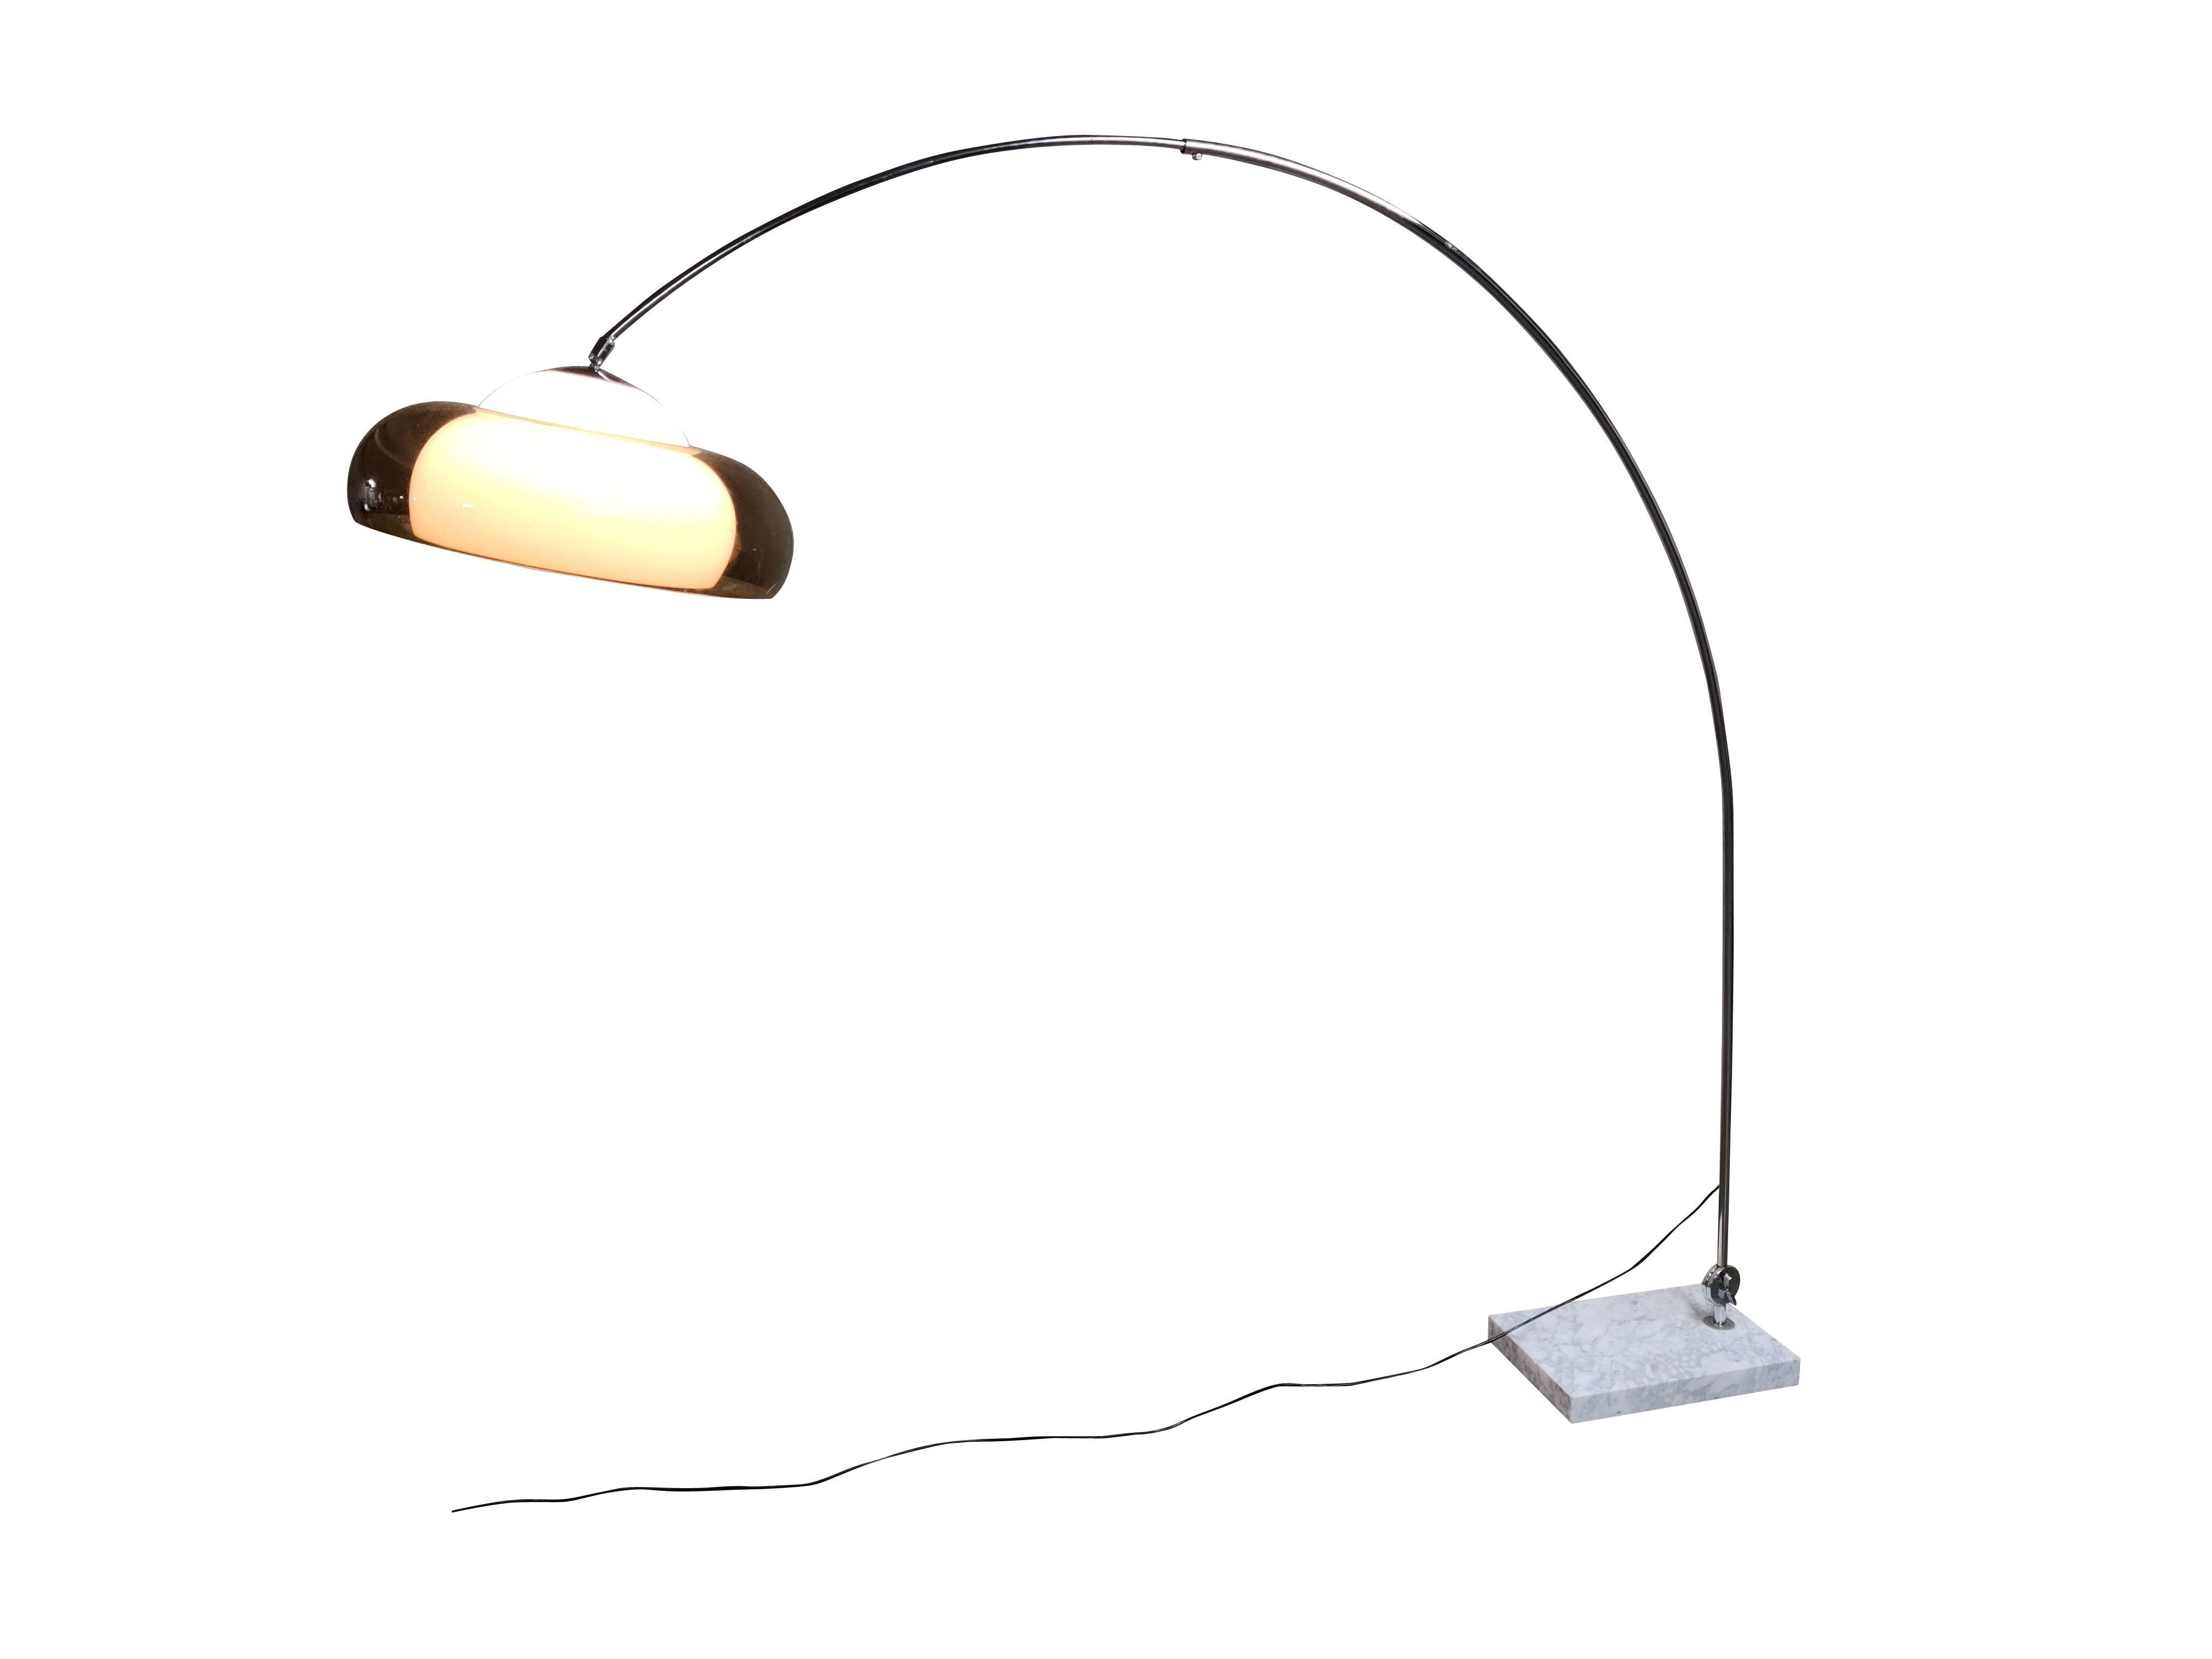 Vintage extendable floor lamp.

Consists of a chromed arm, a white marble base and a plexi lamp shade emitting a warm light.

The length of the arm varies between 150-200cm (59-78